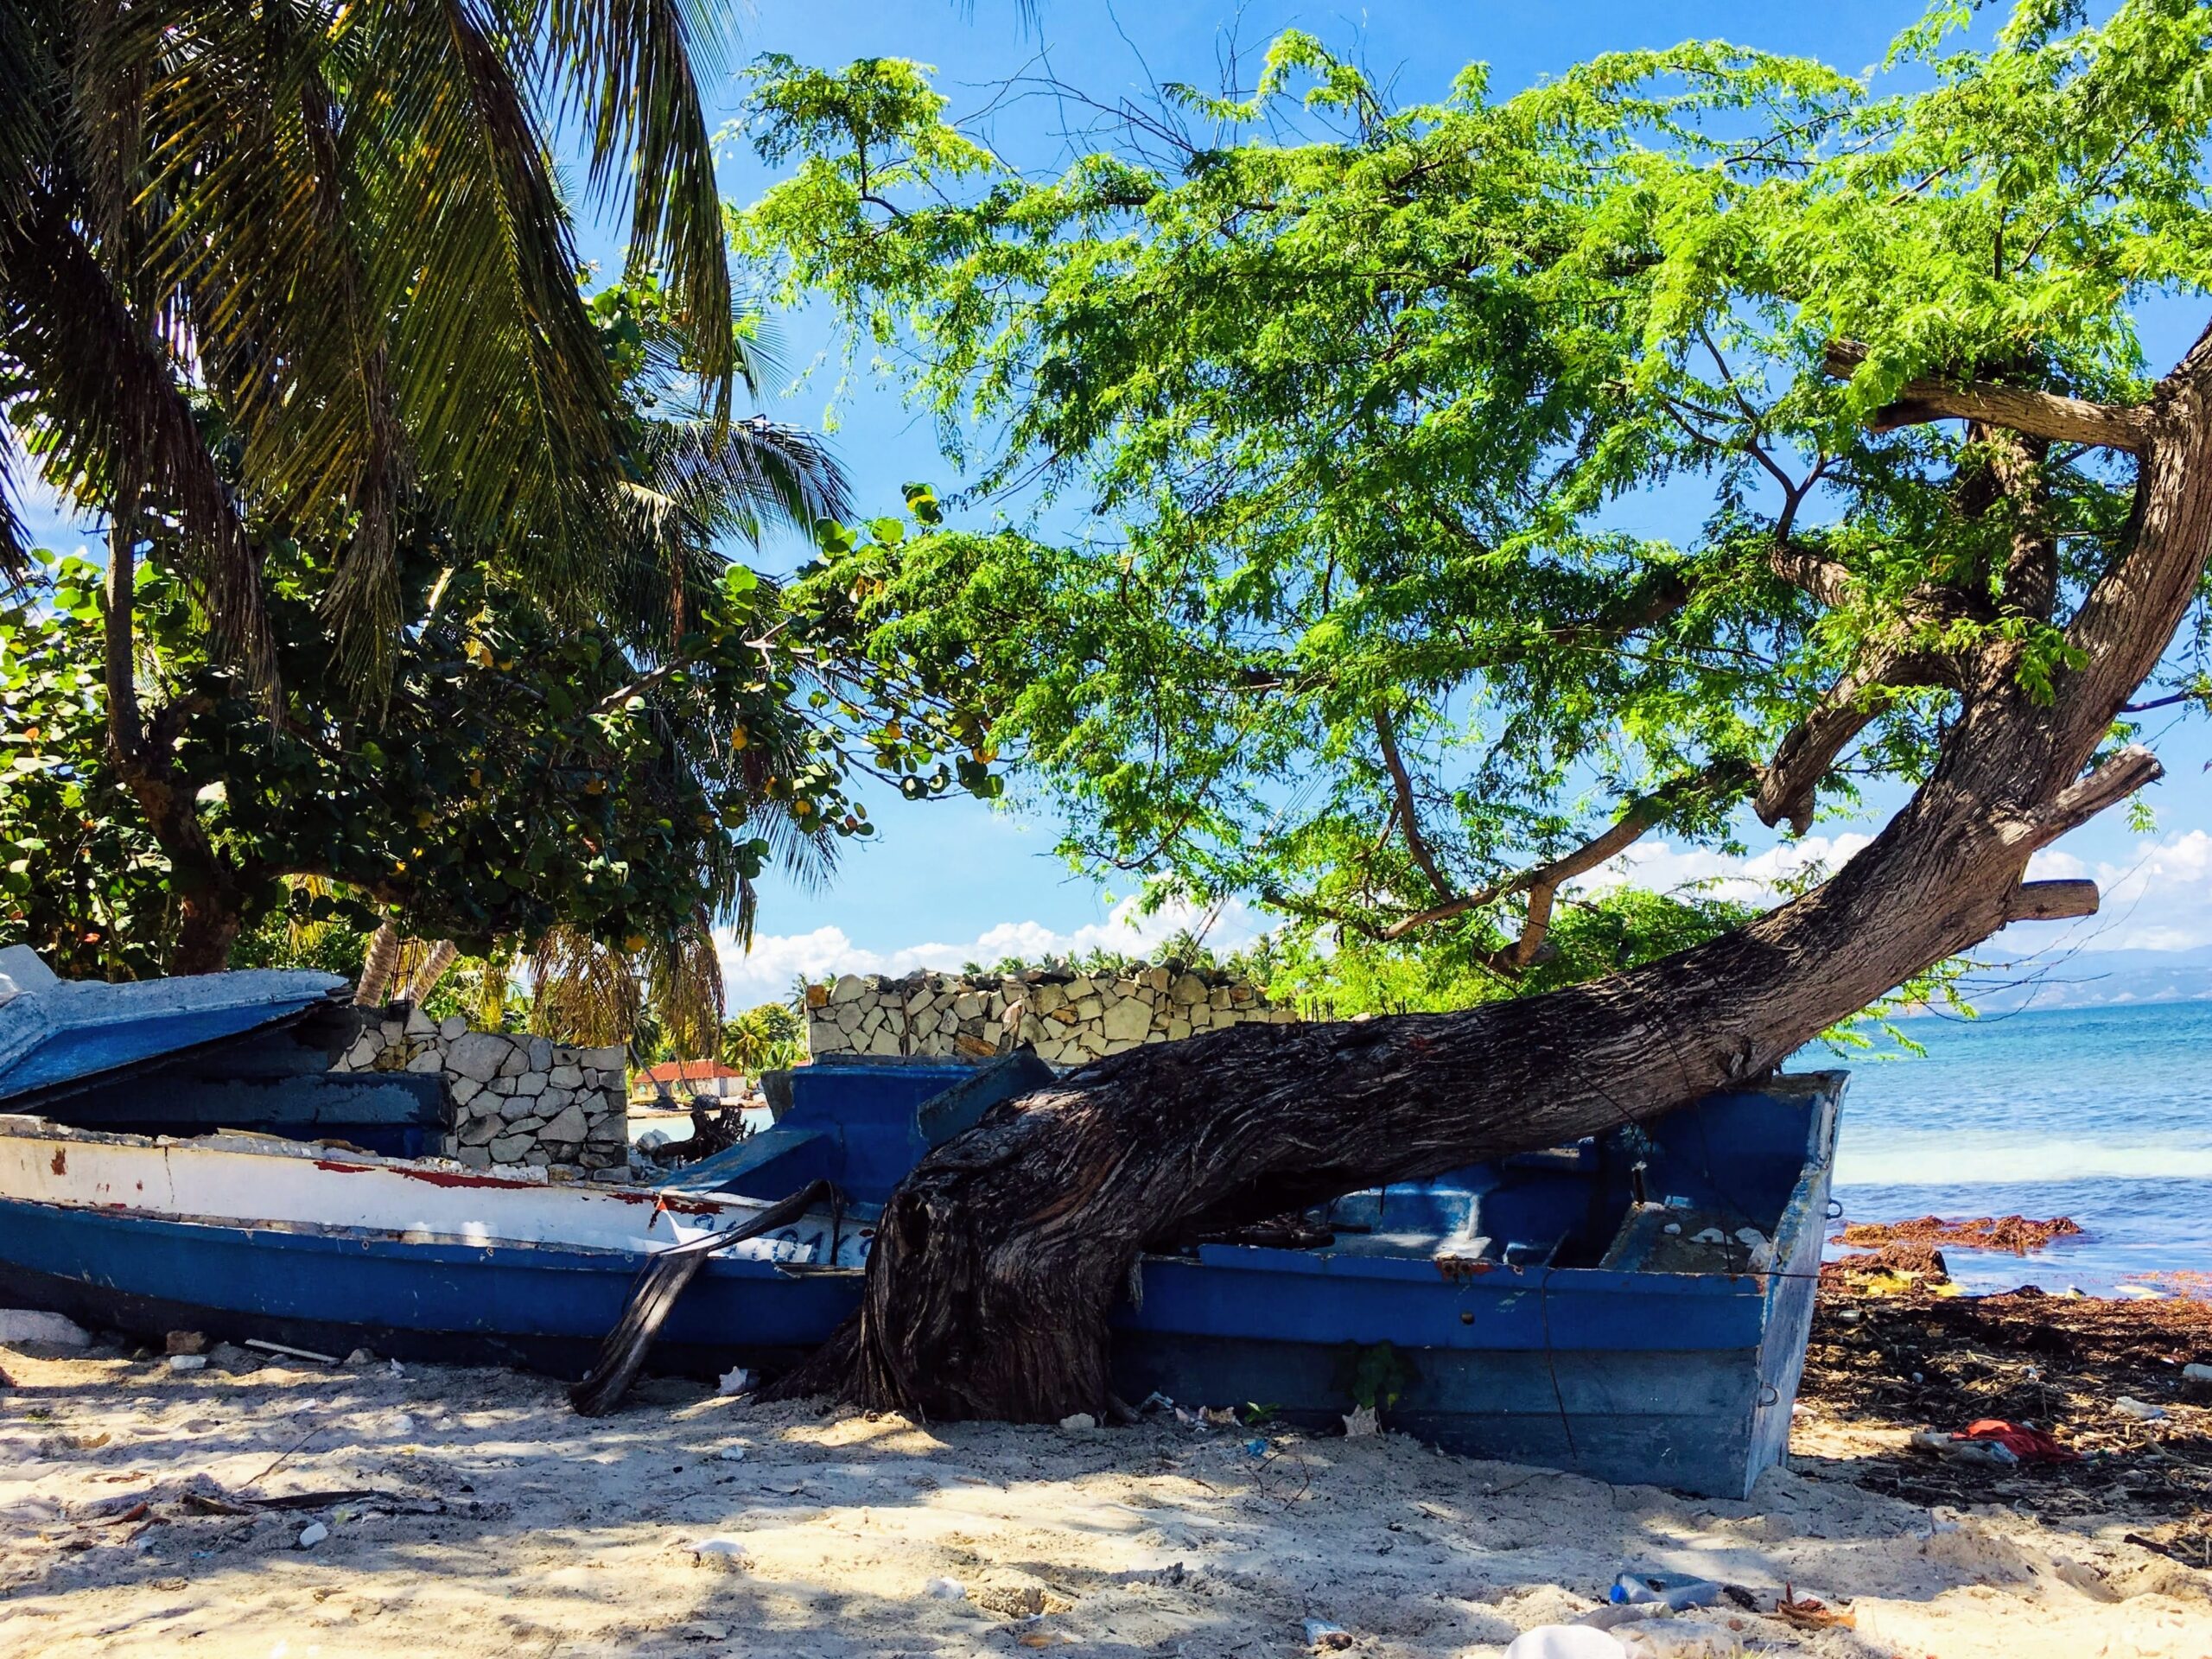 A tree grew around this shipwrecked rowboat on the island of Ile a Vache, Haiti